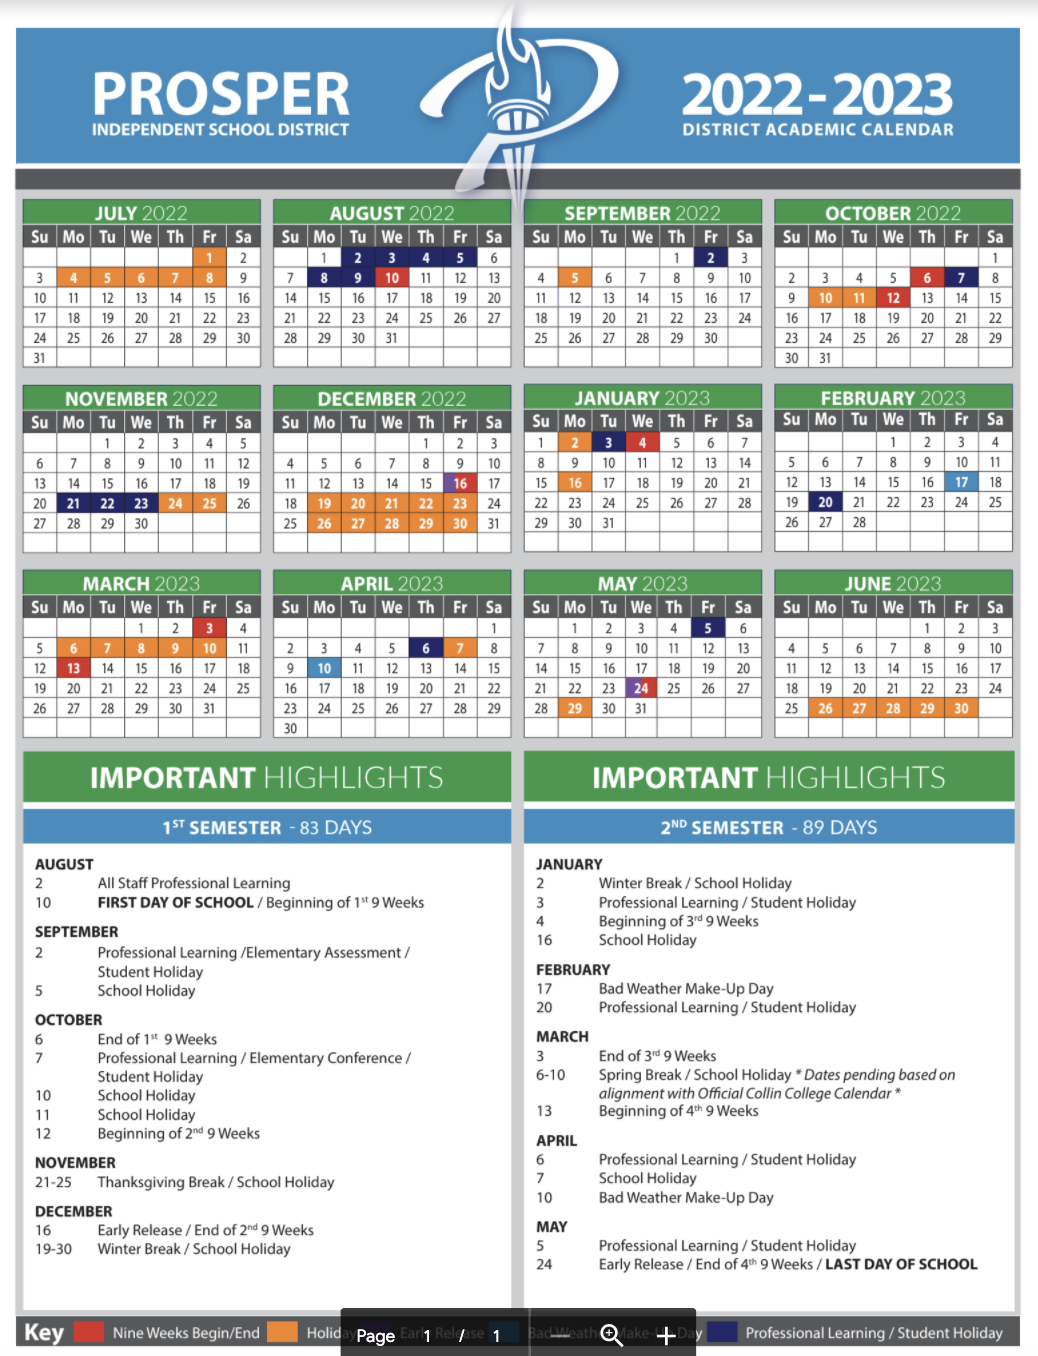 Fort Worth Isd Calendar 2022 23 Here Are Prosper Isd's School Calendars For The 2022-2023 And The 2023-2024  School Years | Cities | Checkoutdfw.com